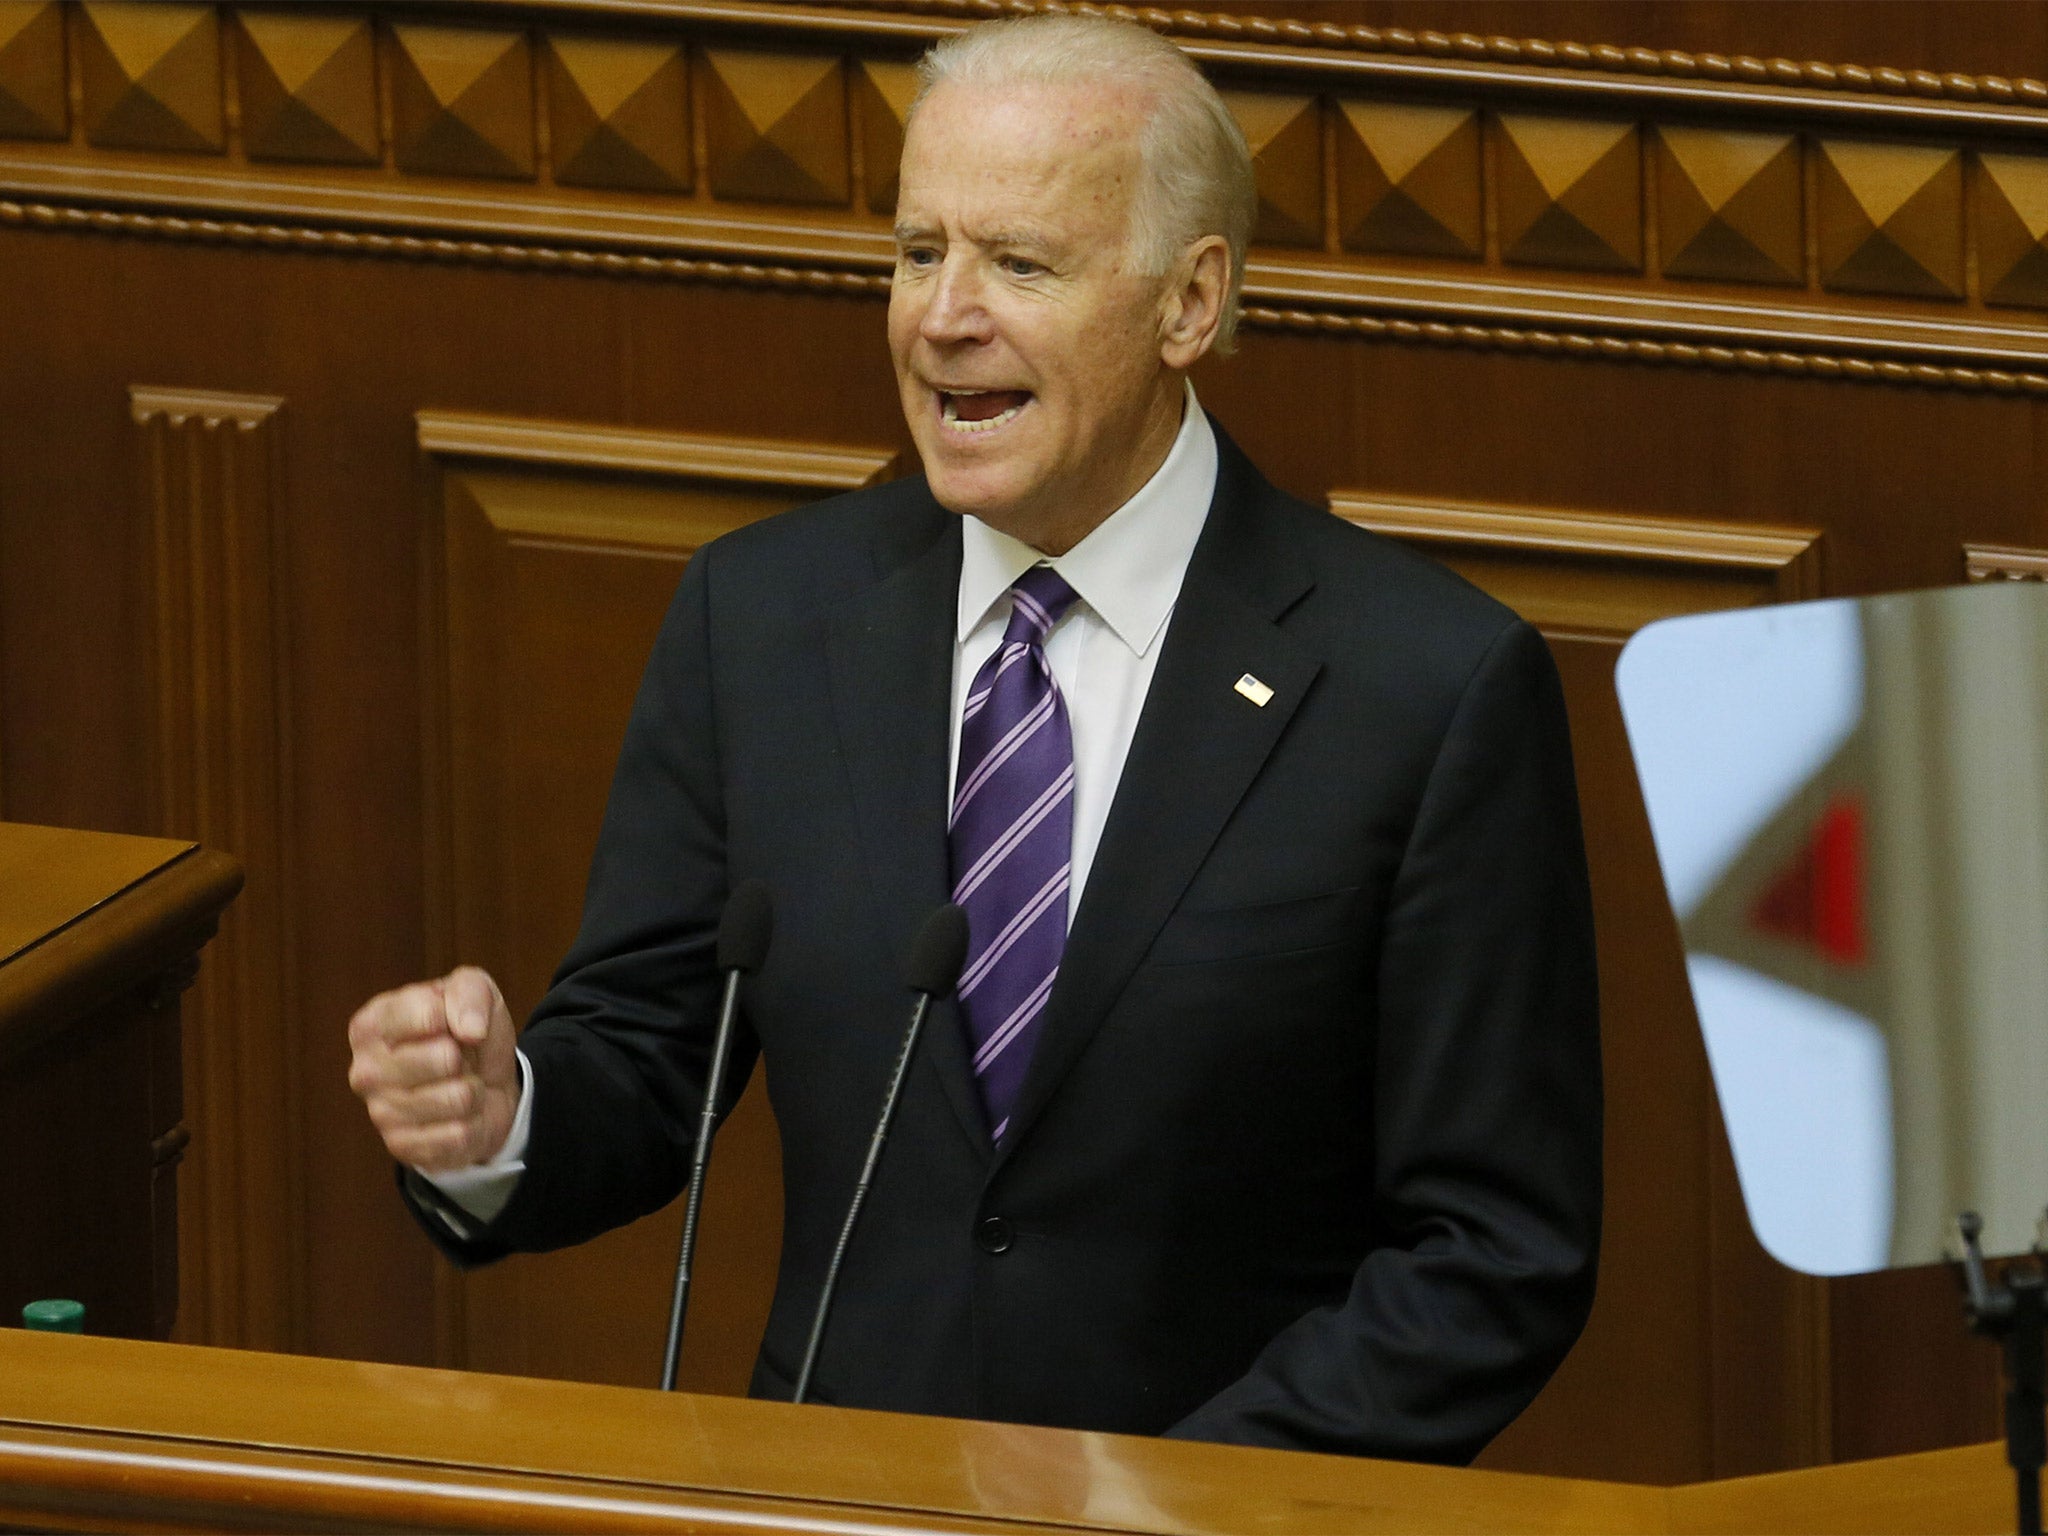 File image: Biden speaks to Zelenskyy on the call after Nuclear power plant attack